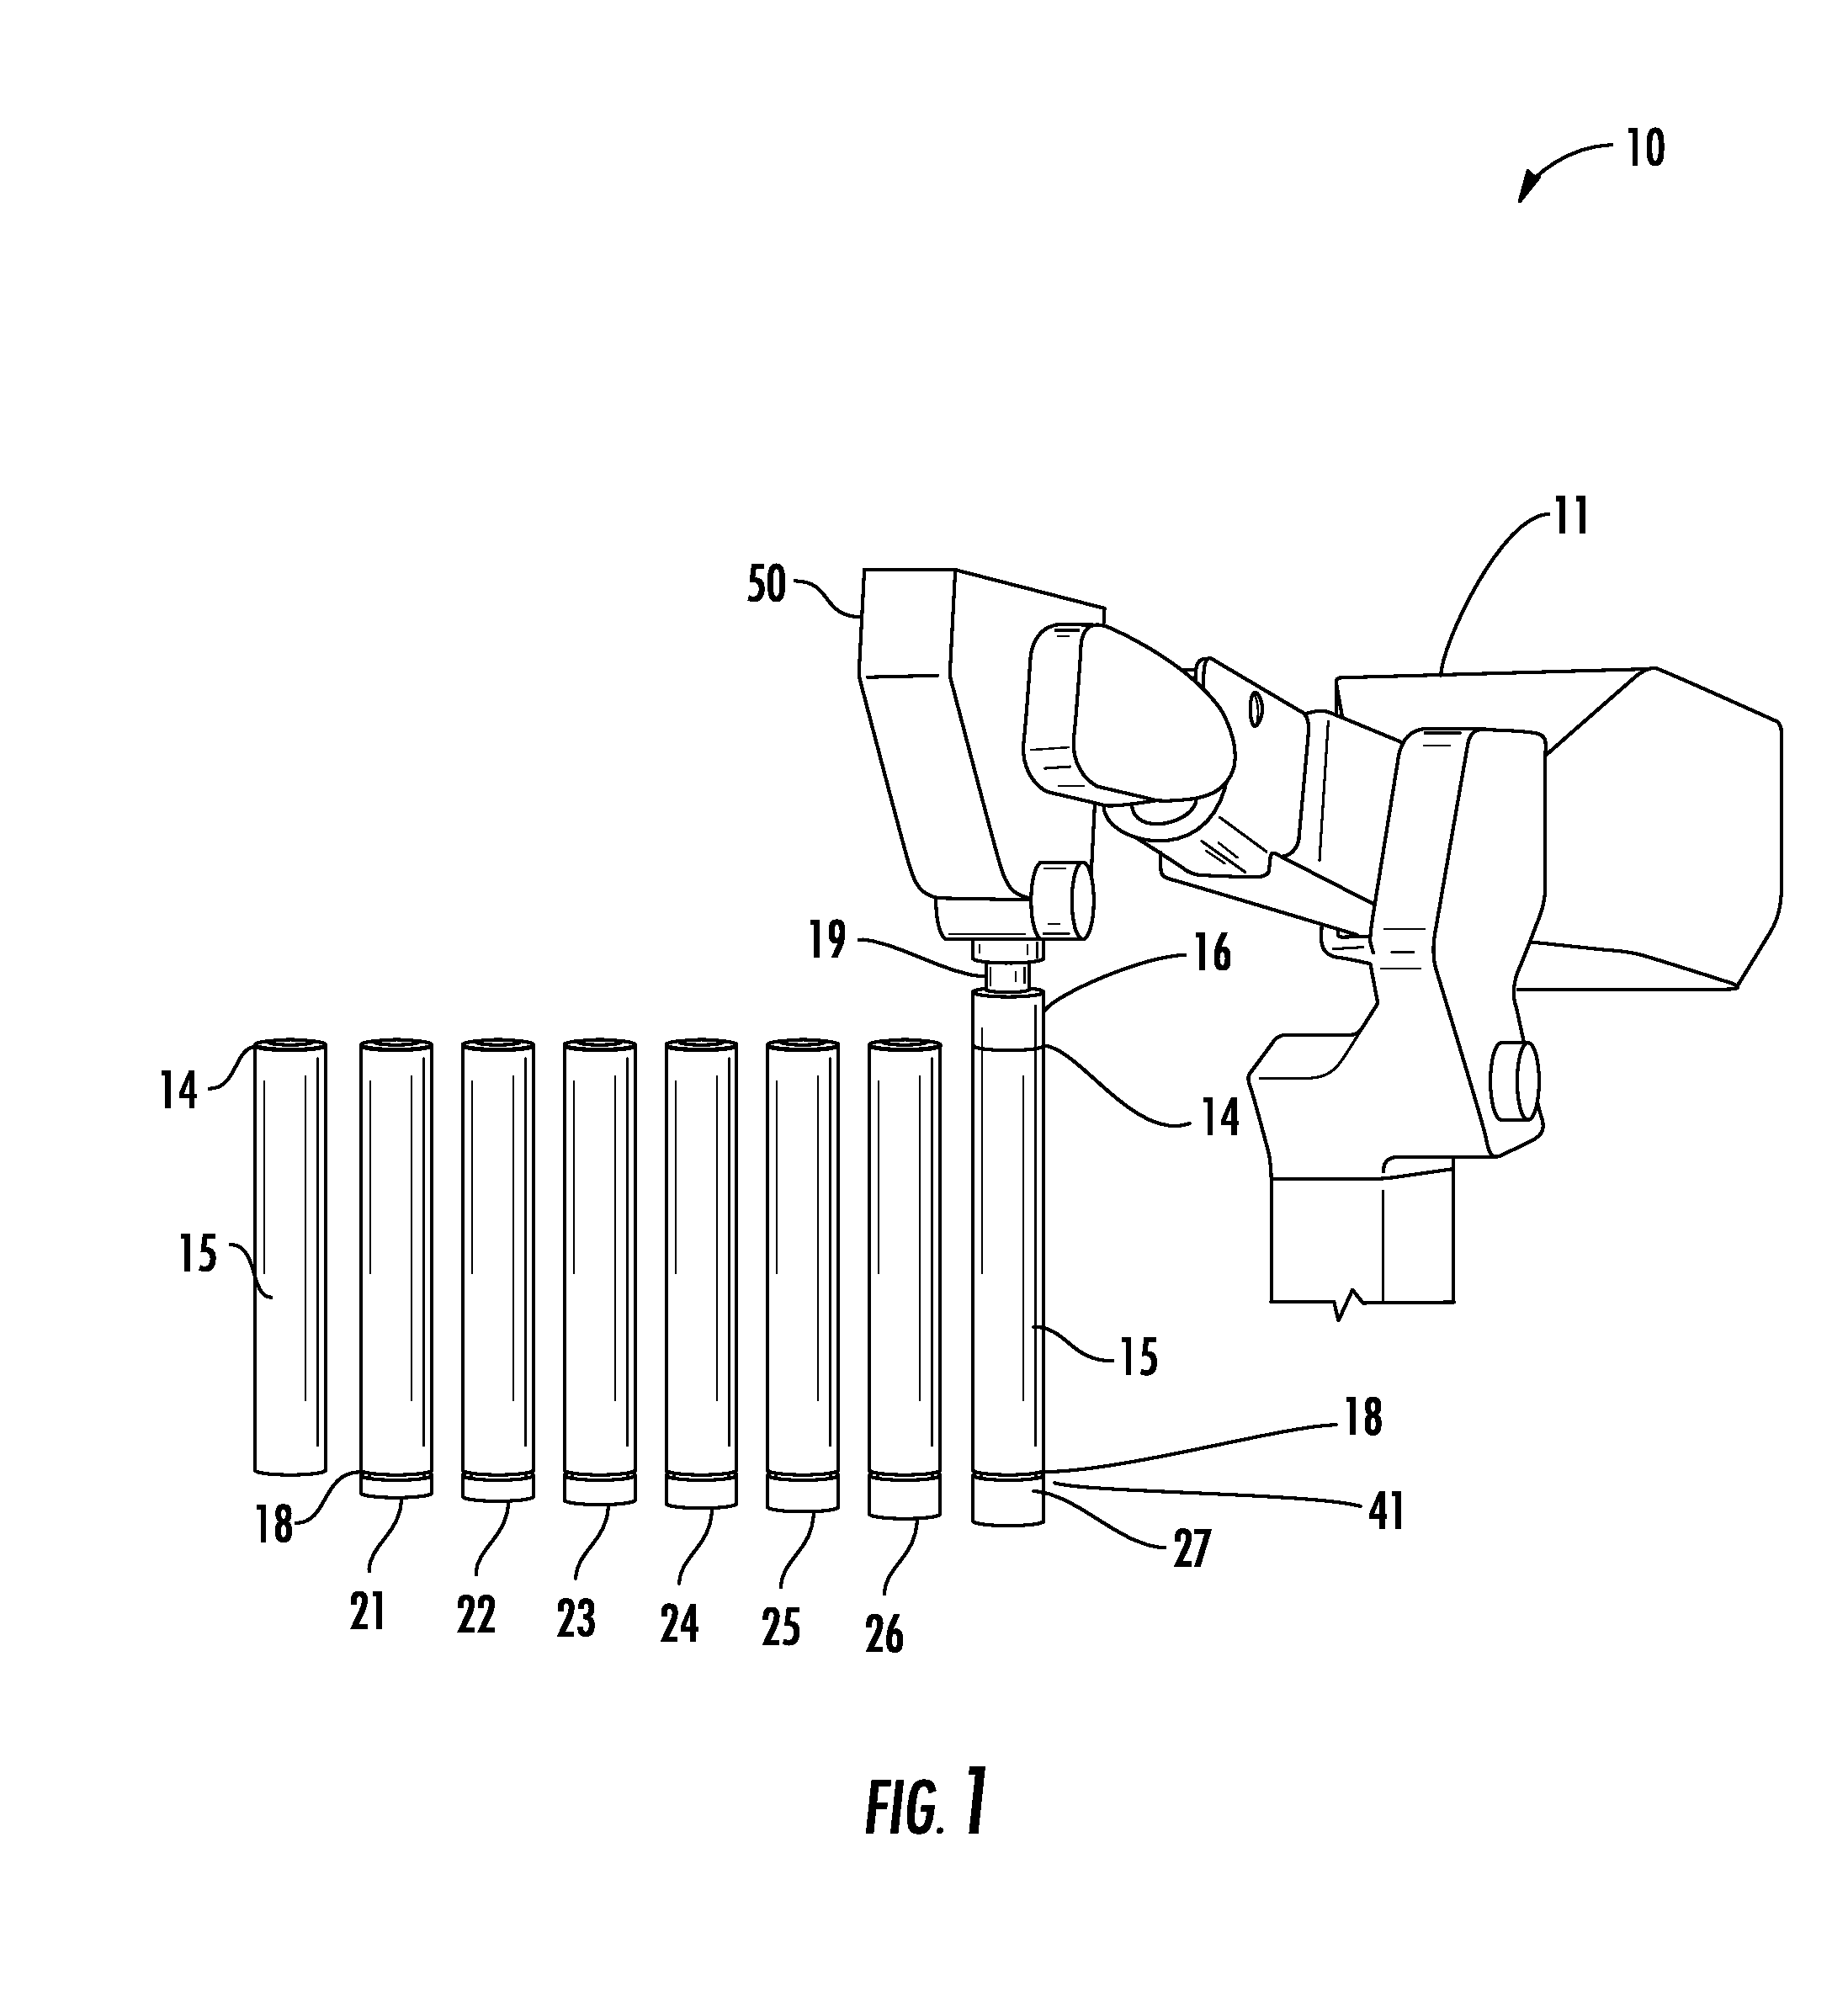 Method of mechanically controlling the amount of energy to reach a patient undergoing intraoperative electron radiation therapy